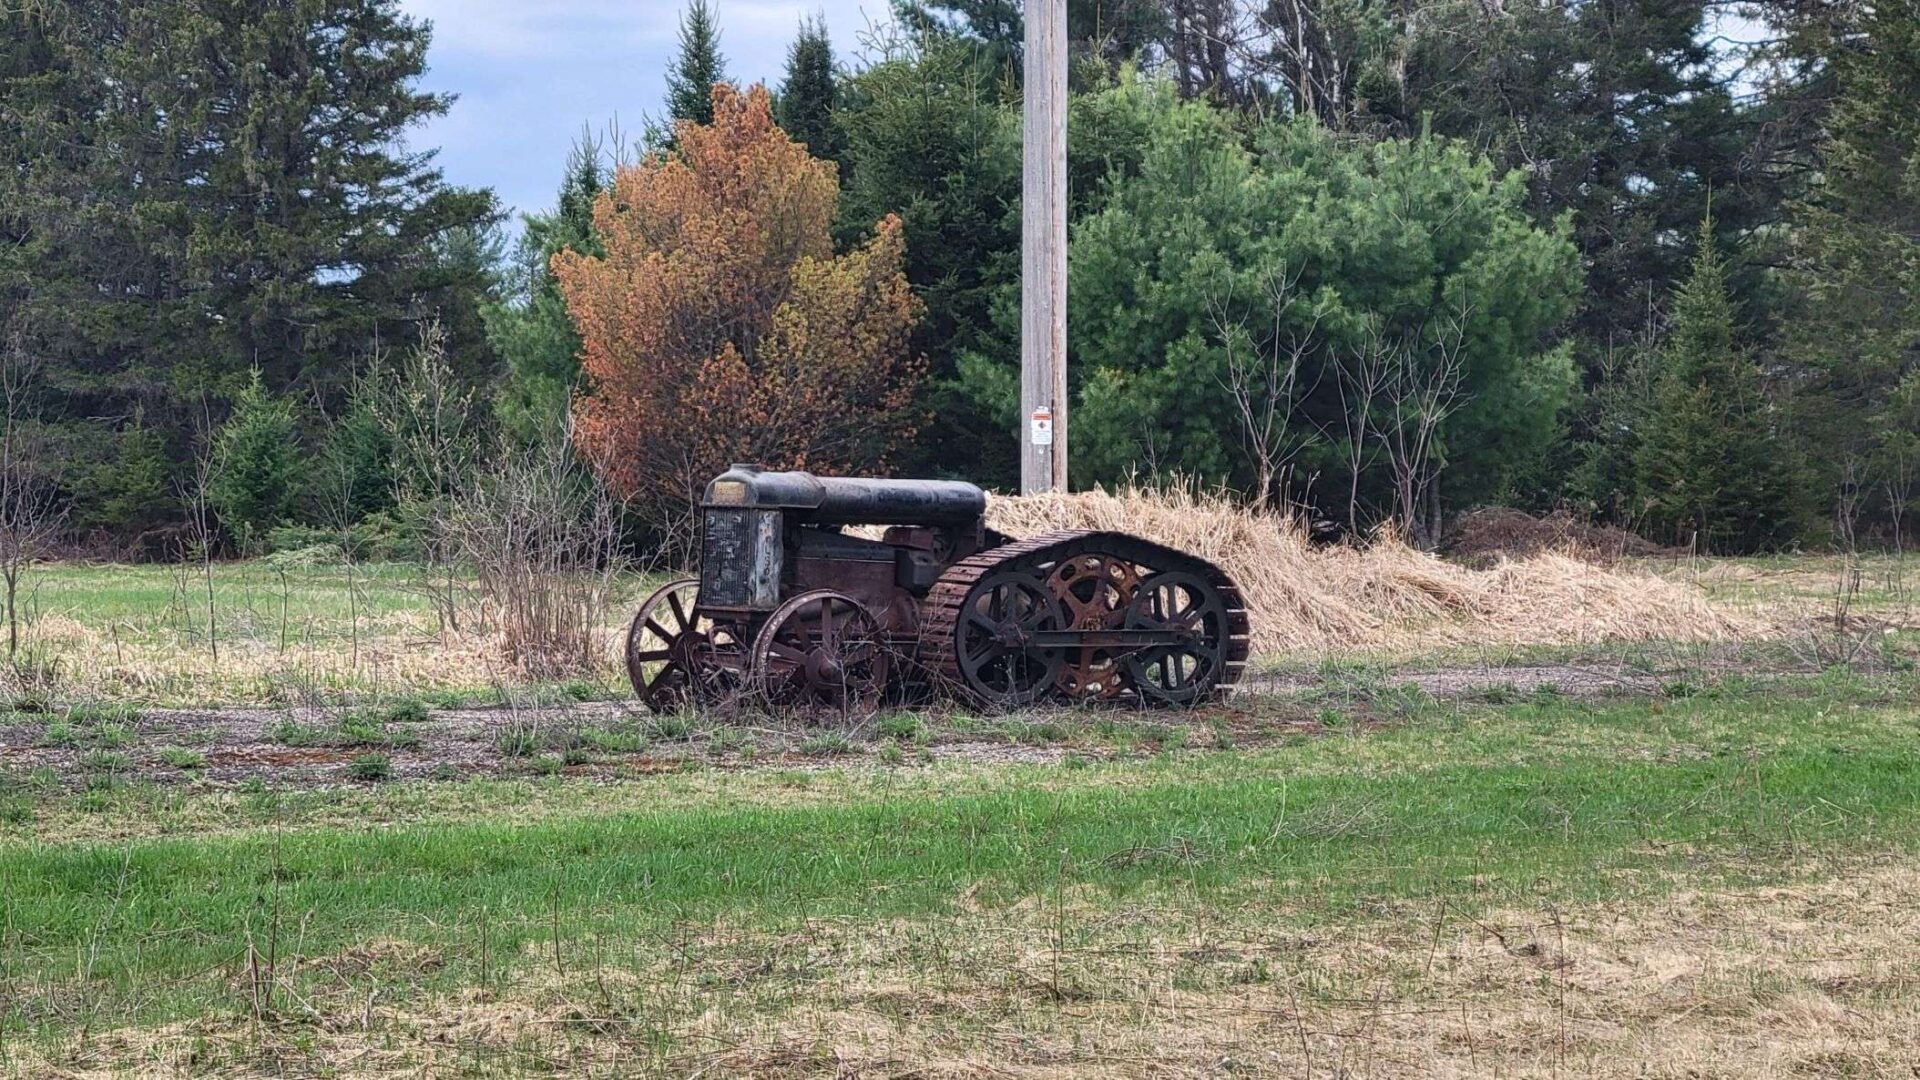 This old tractor was outside in Northern Wisconsin near Eagle River. The back tracks and gears are interesting.